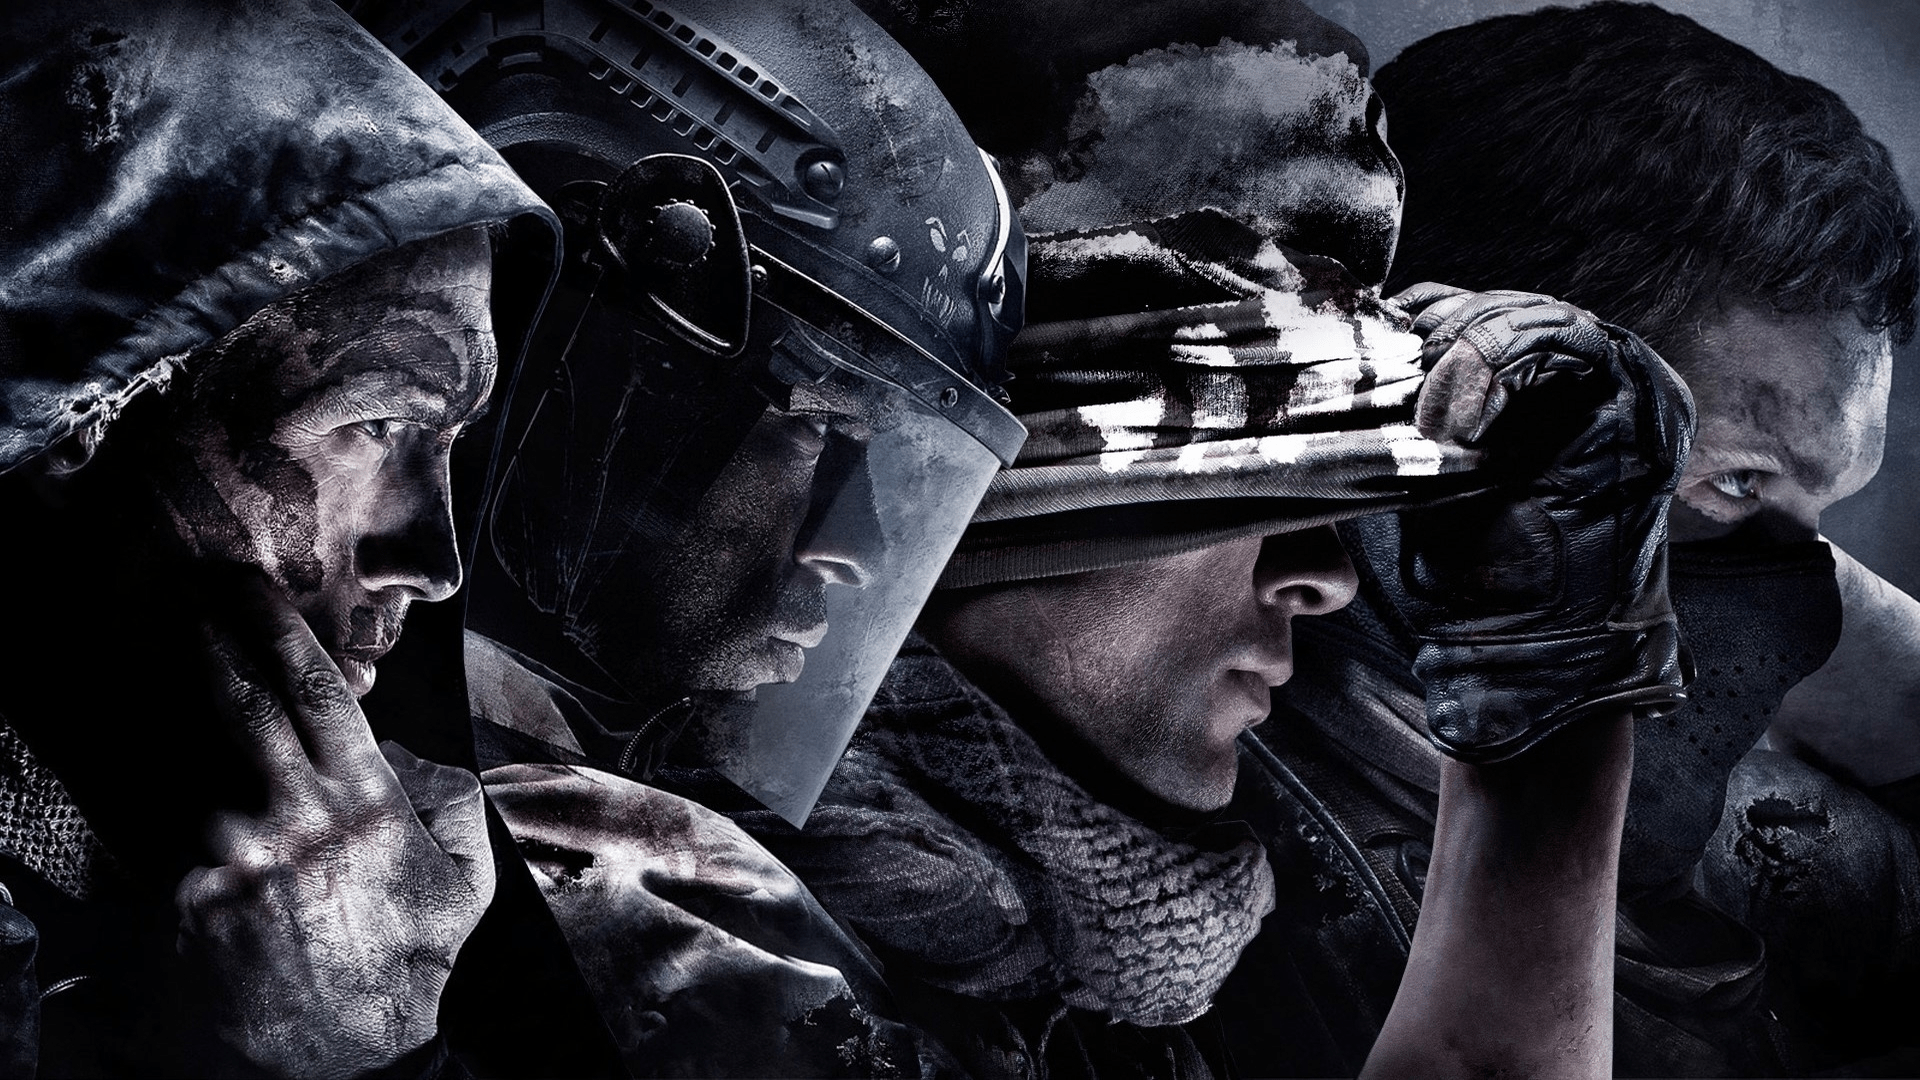 1440p call of duty black ops 4 wallpaper